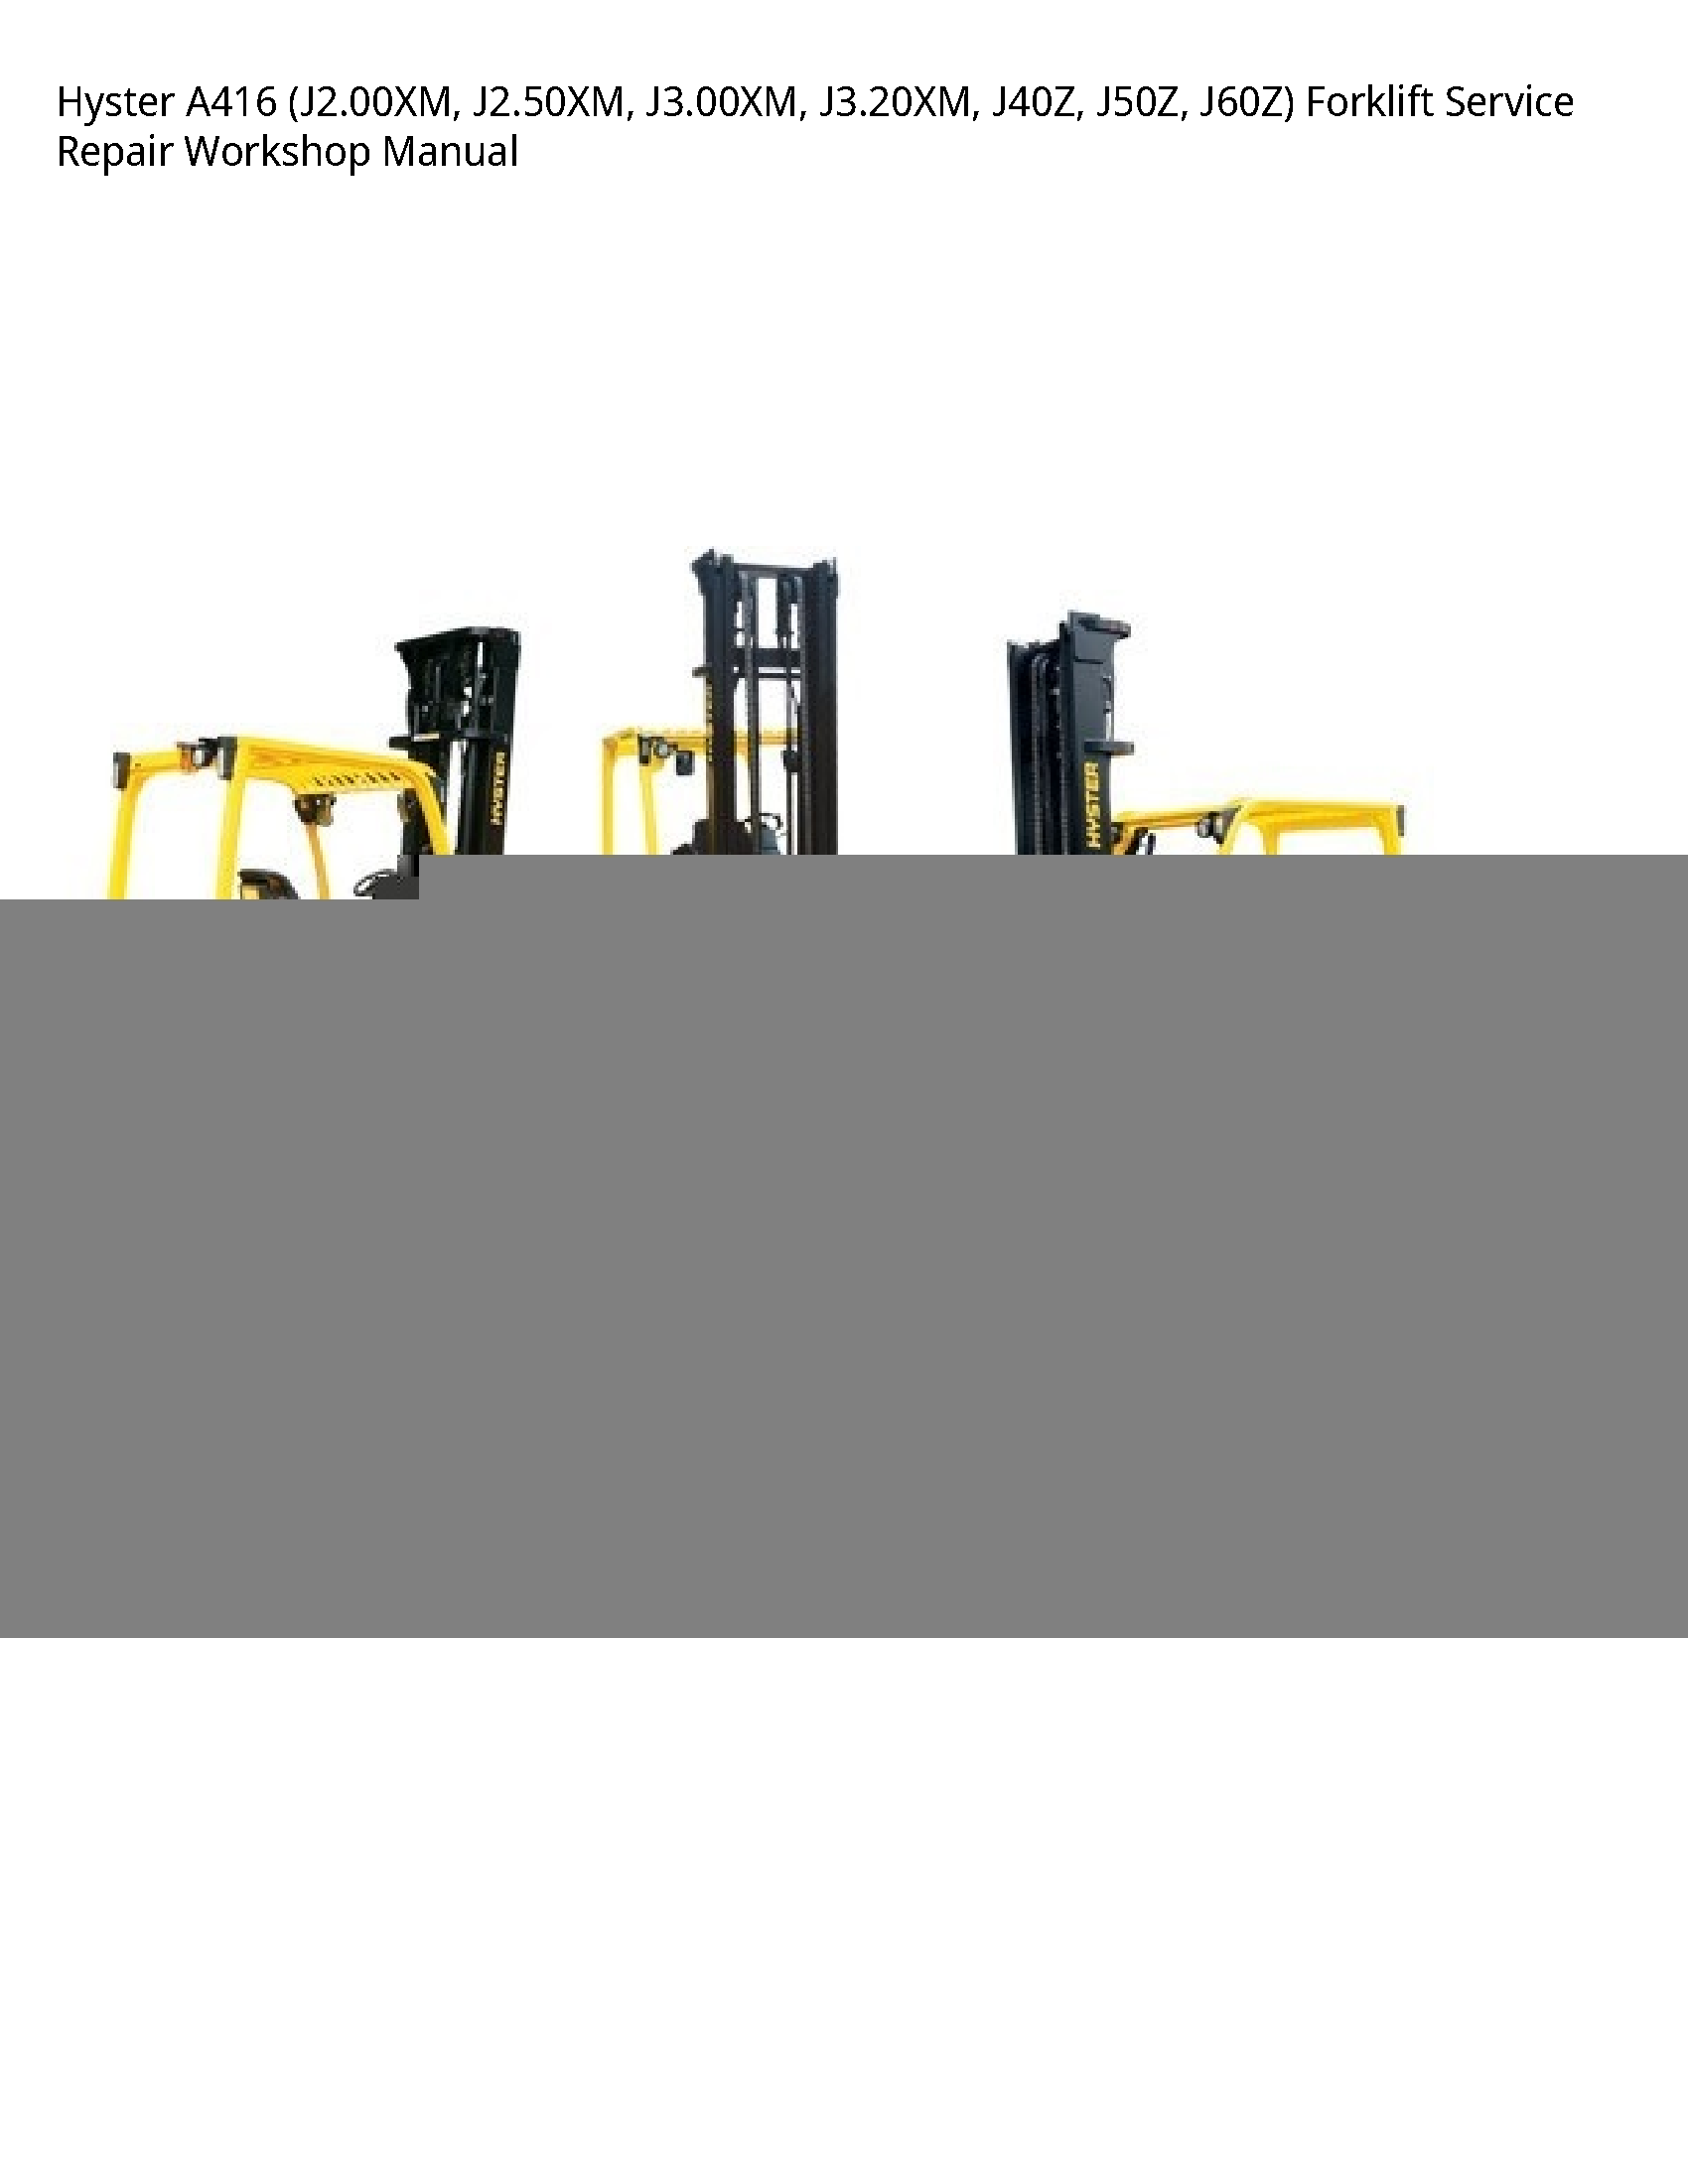 Hyster A416 Forklift manual